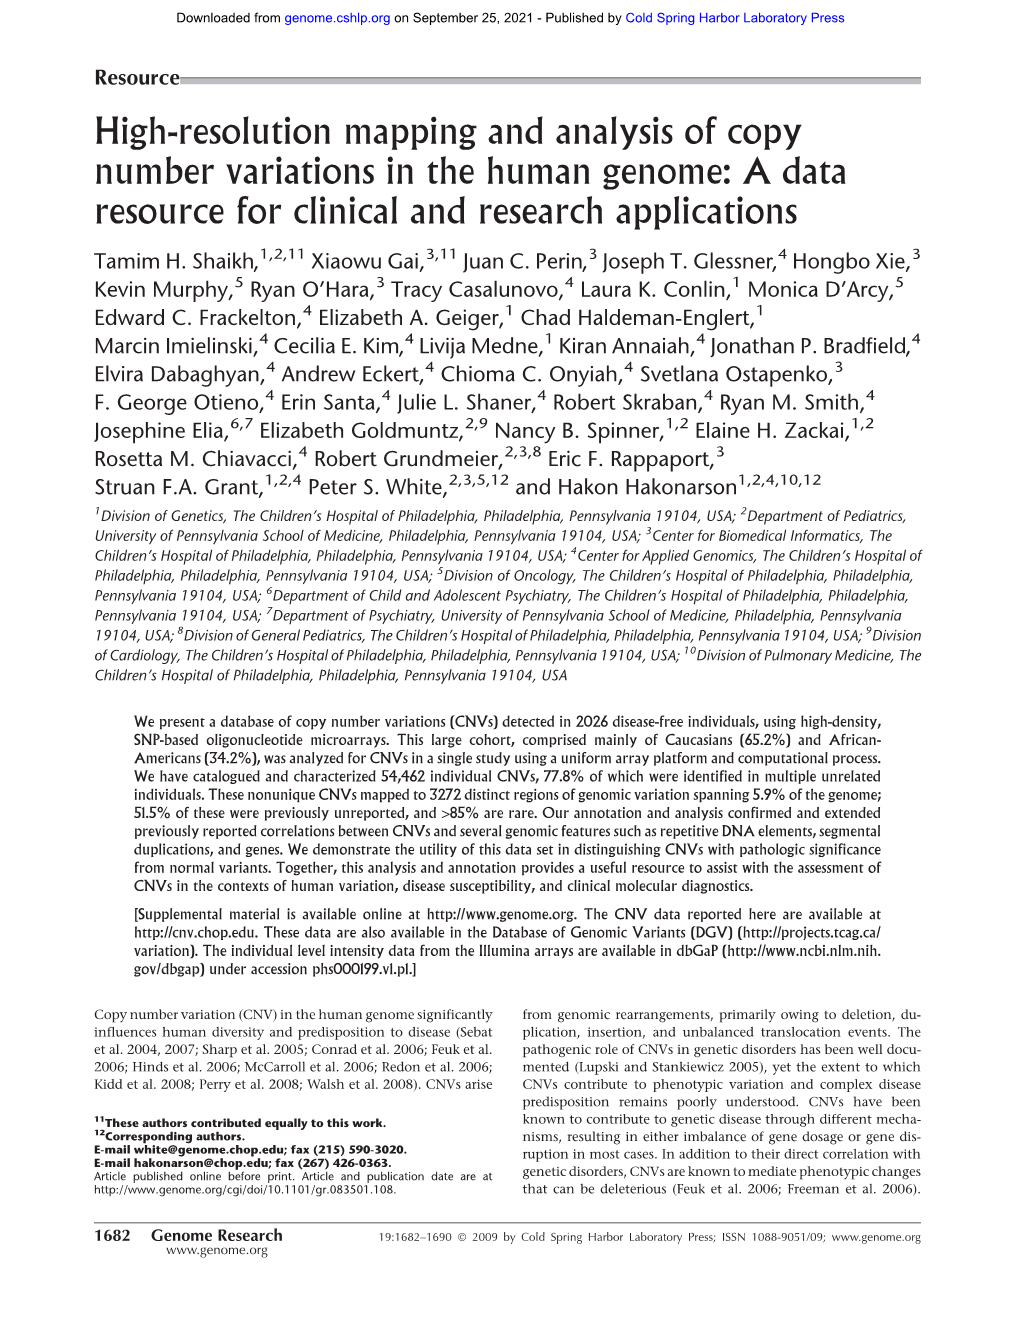 High-Resolution Mapping and Analysis of Copy Number Variations in the Human Genome: a Data Resource for Clinical and Research Applications